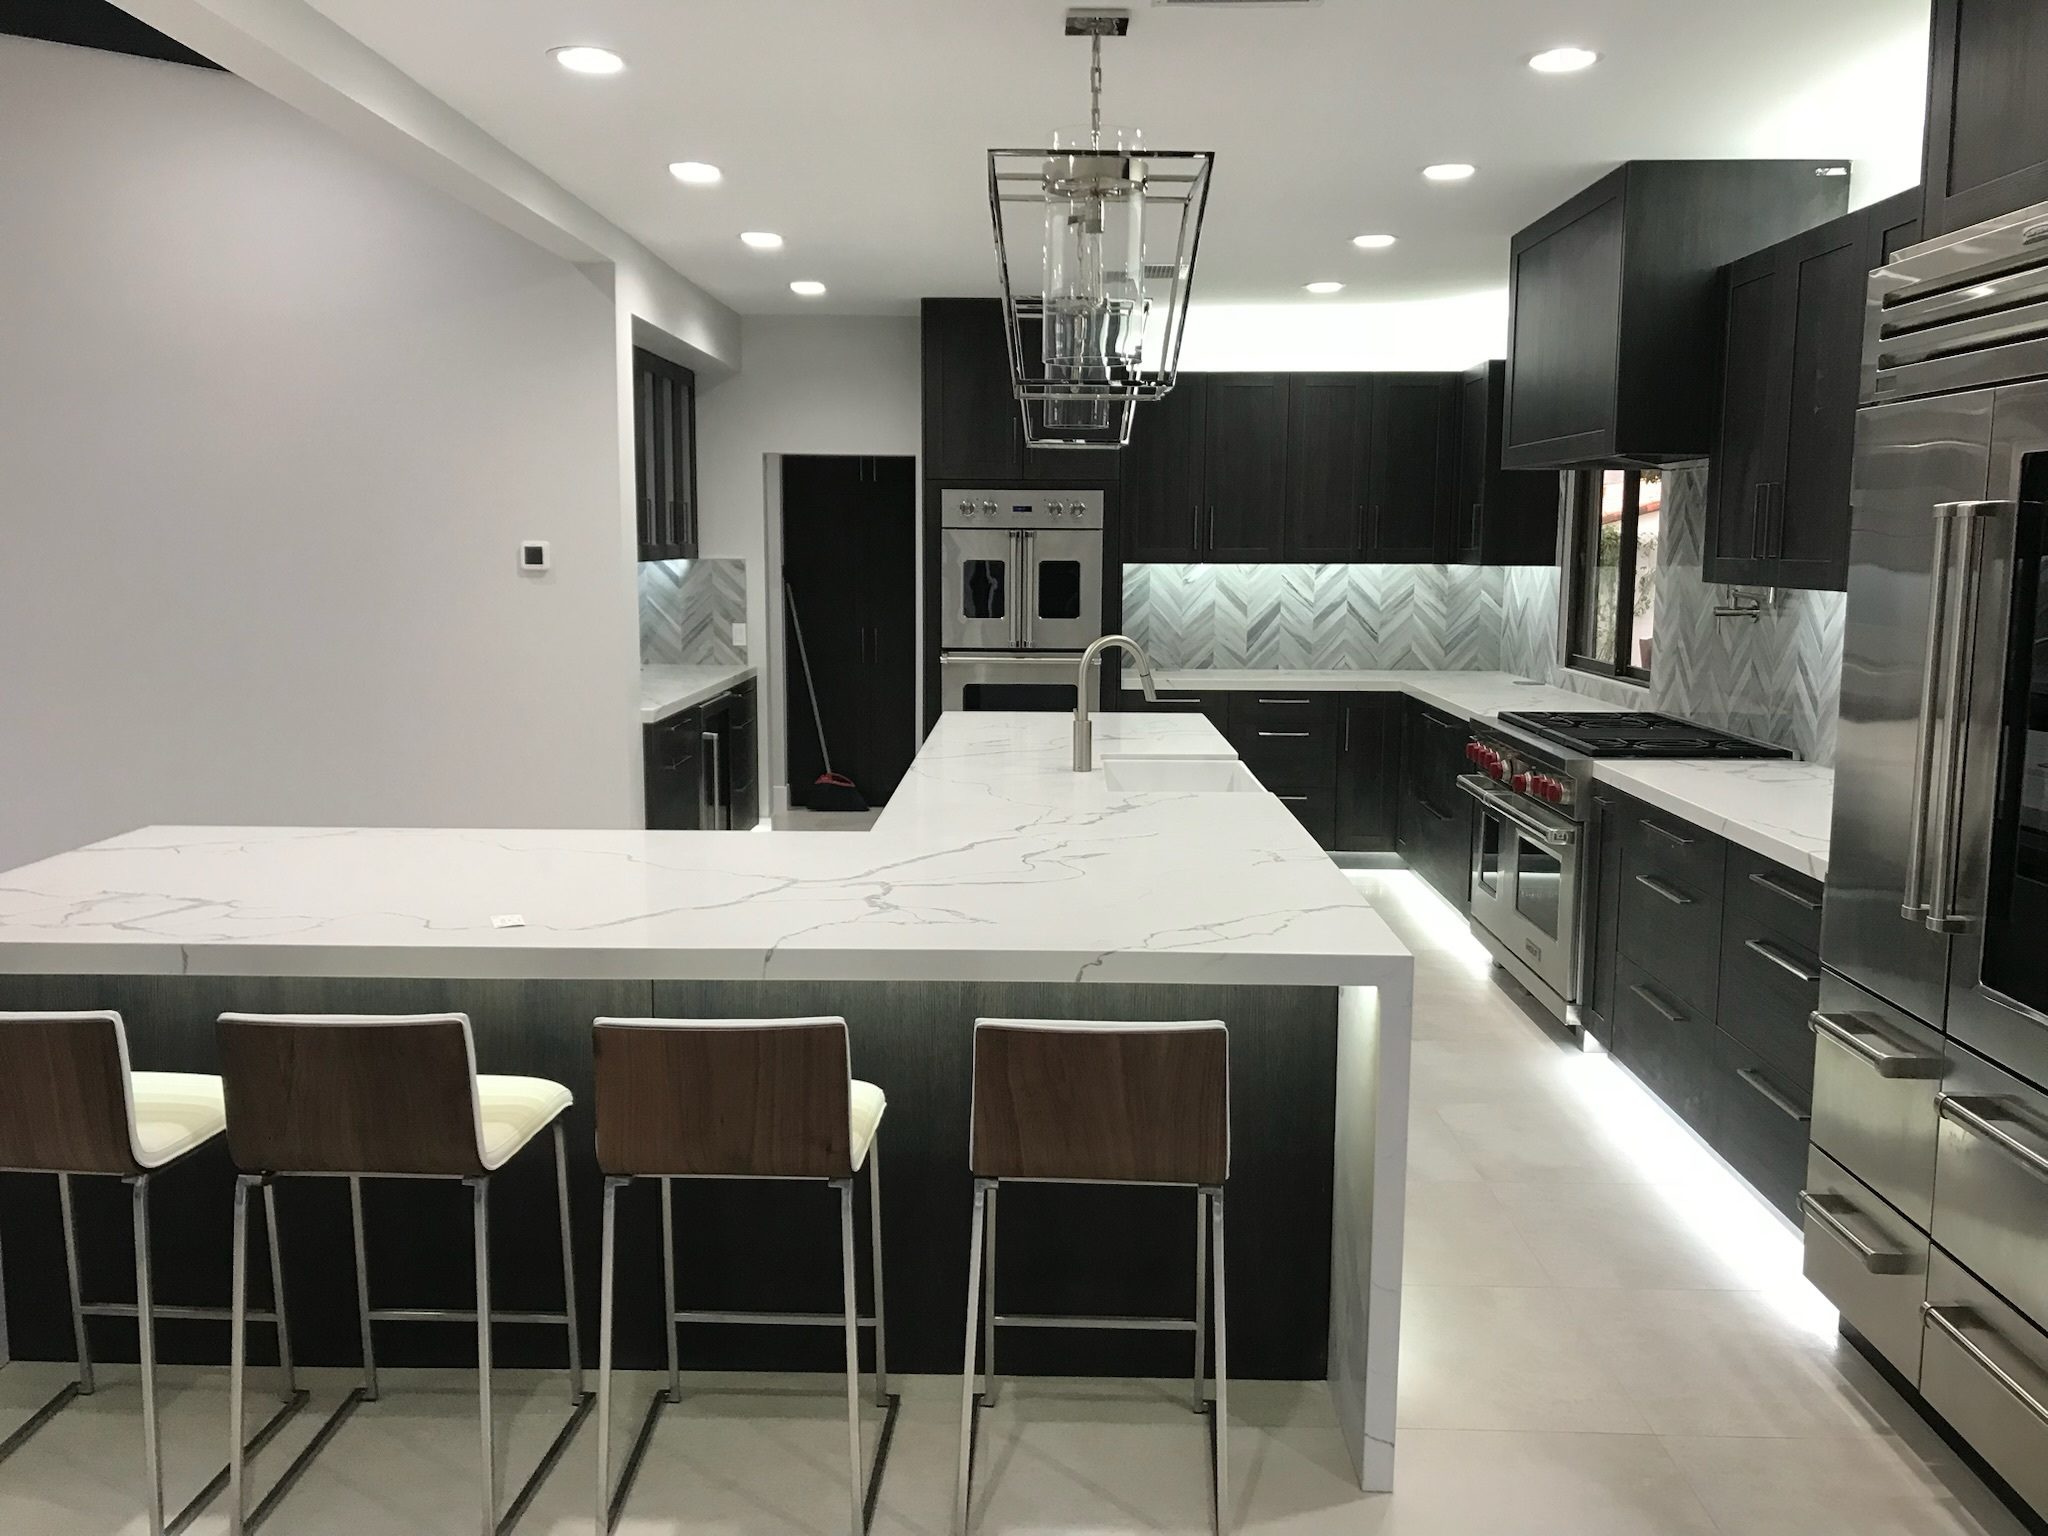 Modern kitchen interior featuring dark wood cabinets, white marble countertops, stainless steel appliances, and a central island with bar stools.